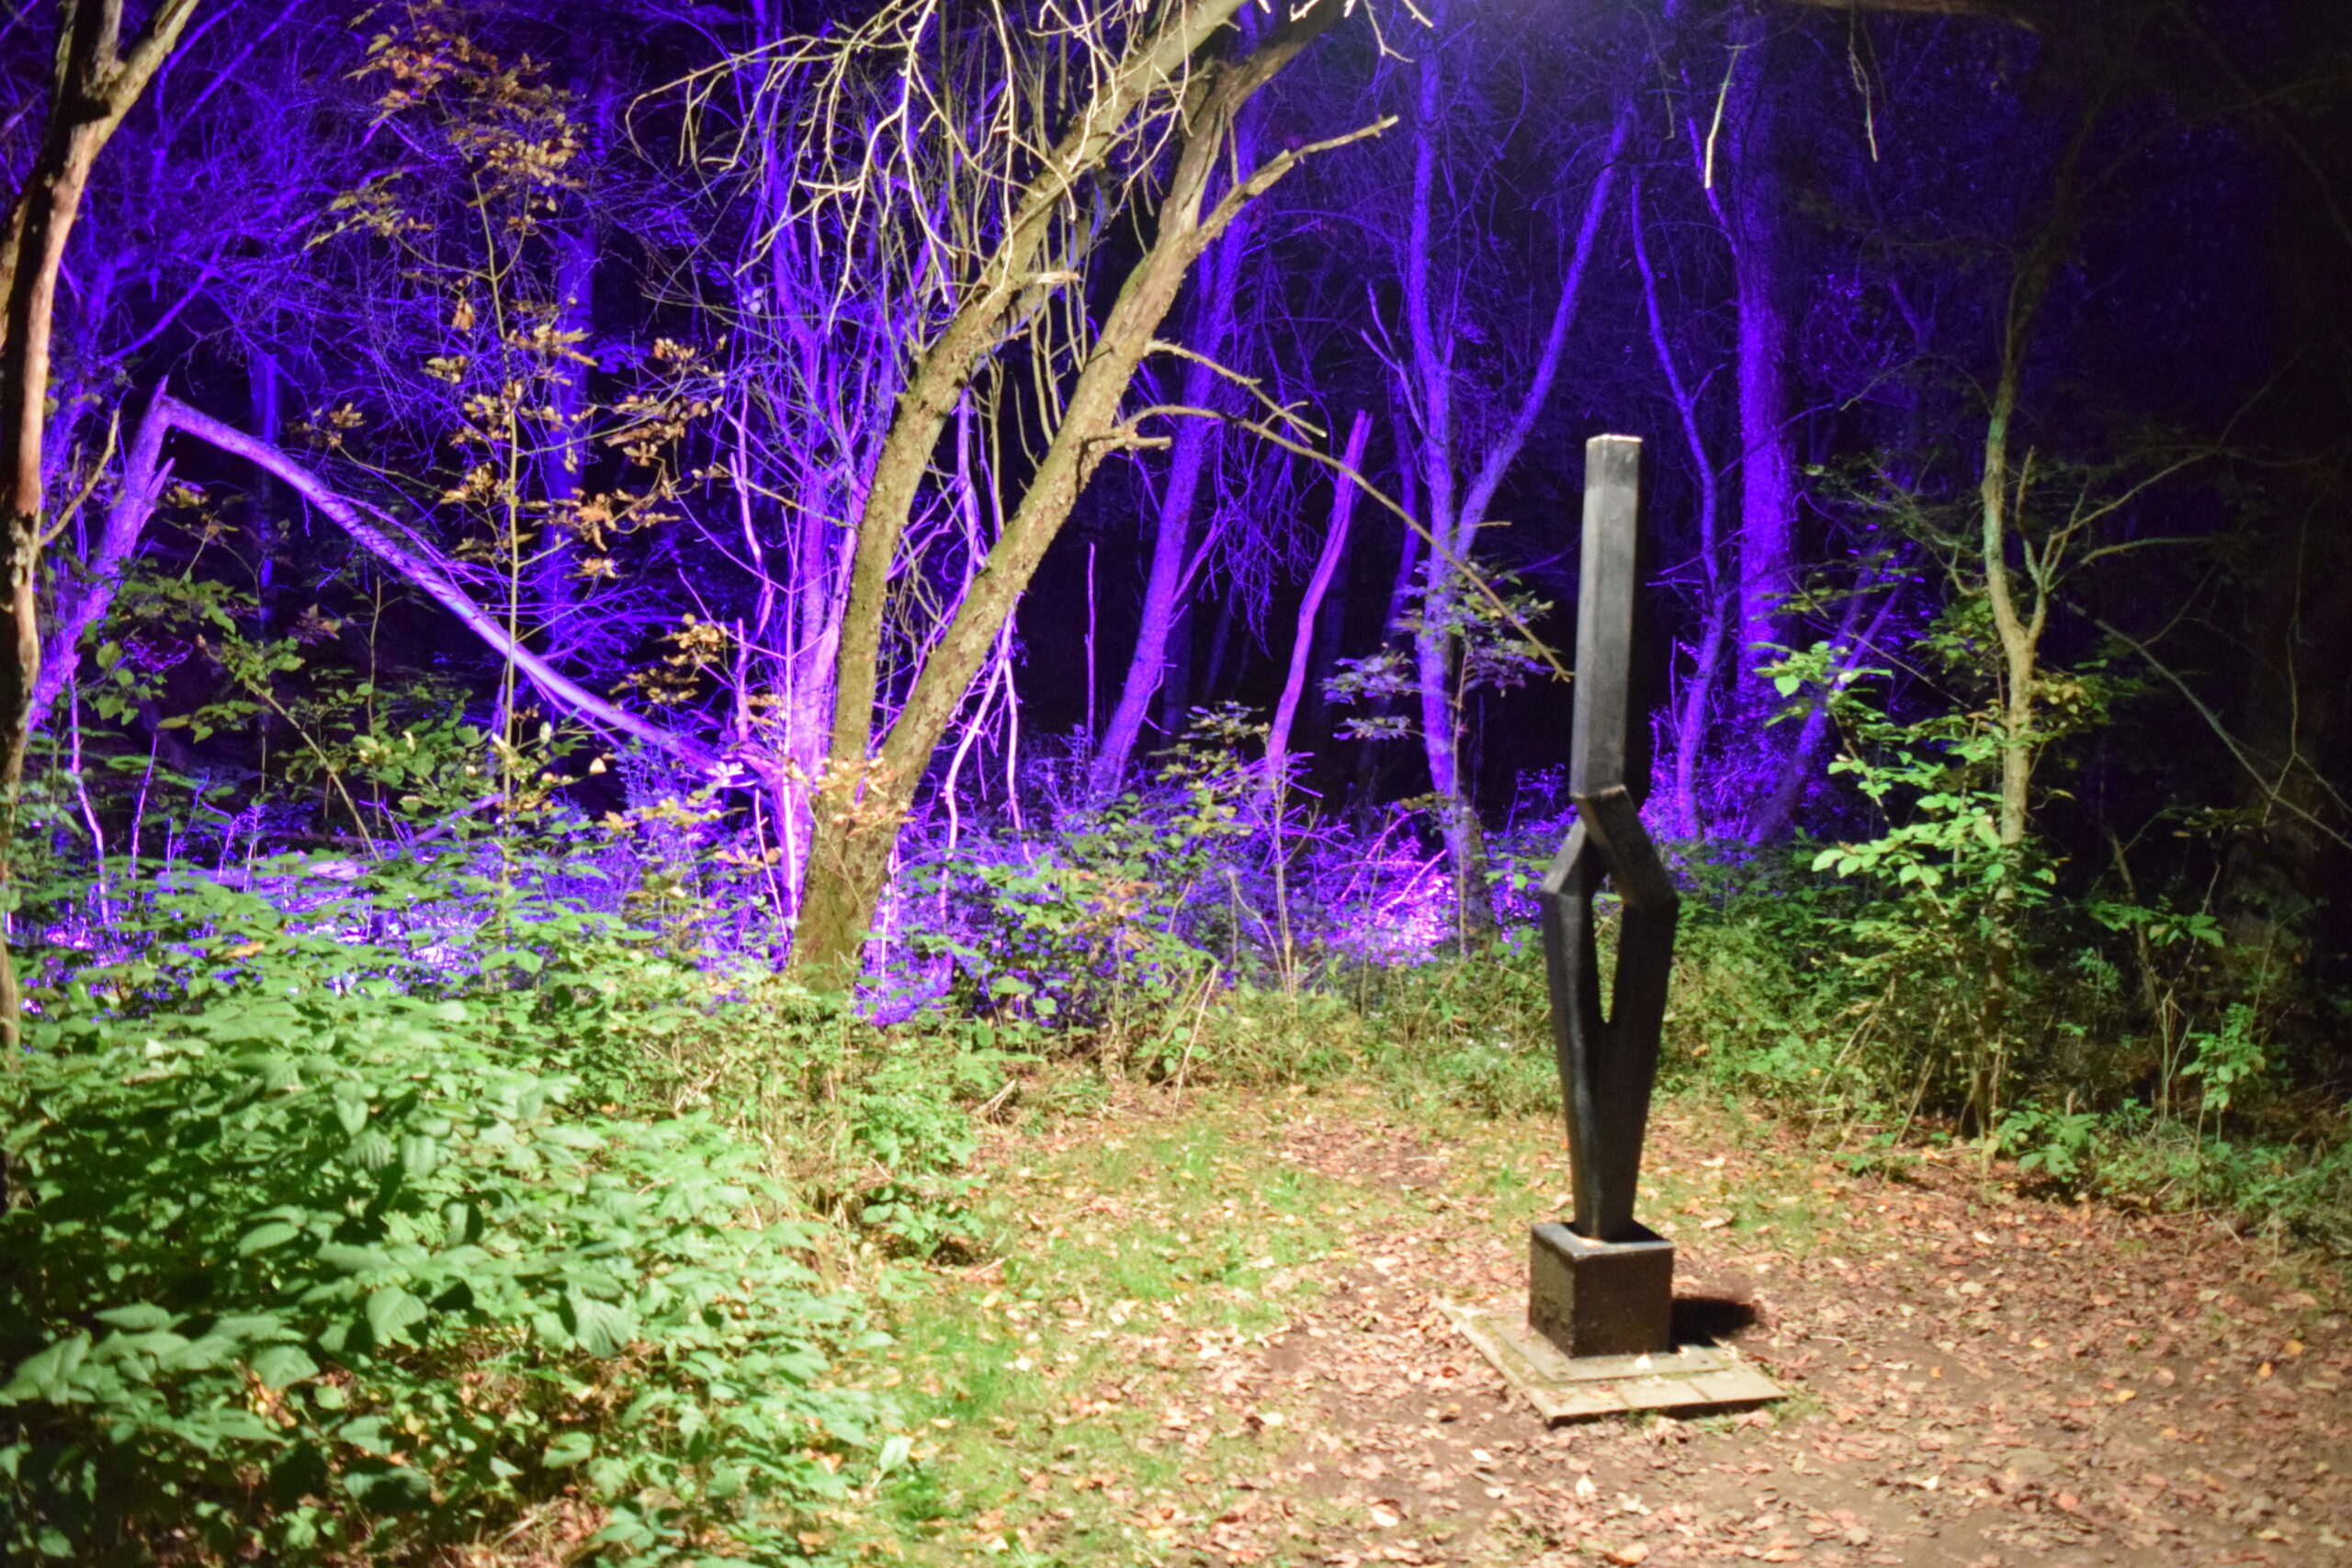 SitlerHQ’s preview video of NIGHT LIGHTS at Griffis Sculpture Park